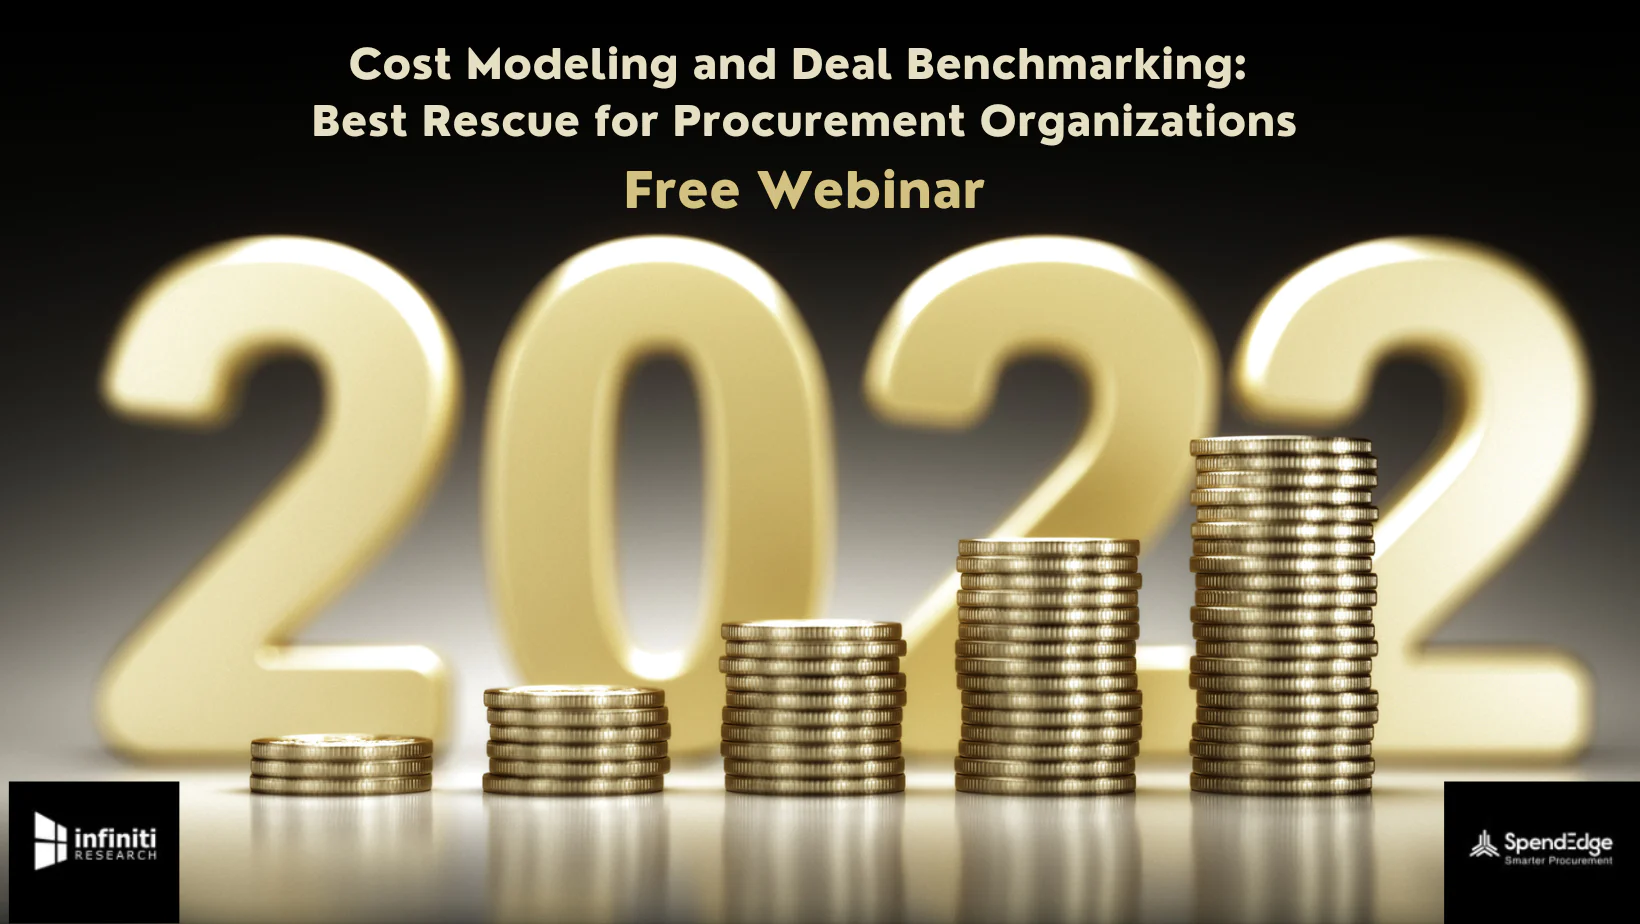 Webinar by SpendEdge on Cost Modeling and Deal Benchmarking: Best Rescue for Procurement Organizations